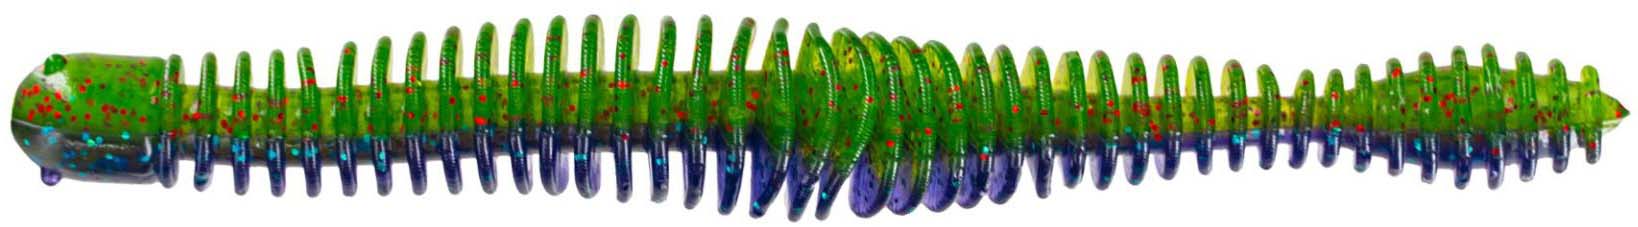 Big Bite Baits Coontail Worm 4 3/4 inch Ribbed Worm